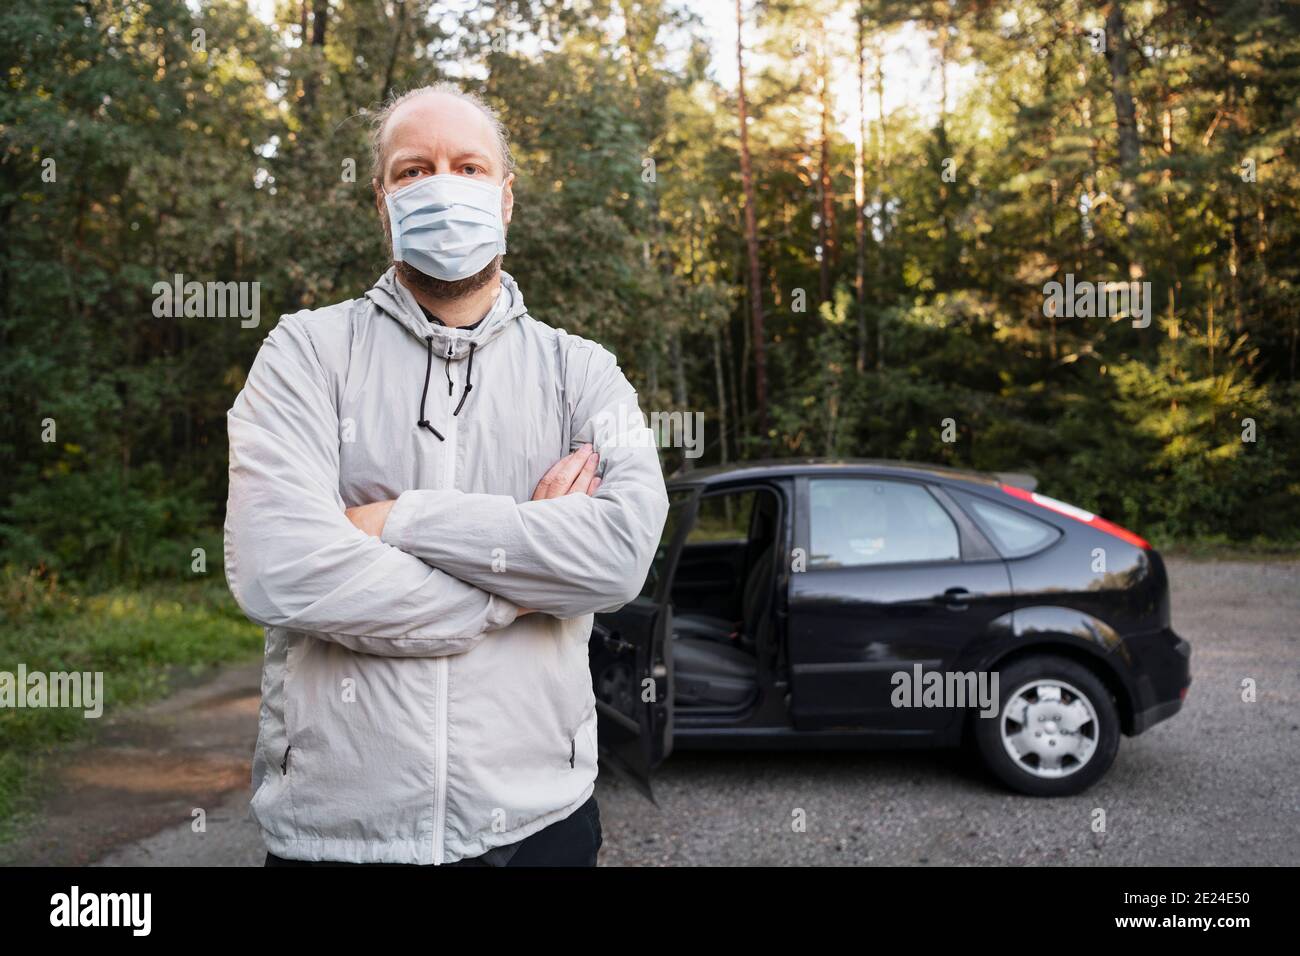 Man wearing face mask, parked car on background Stock Photo